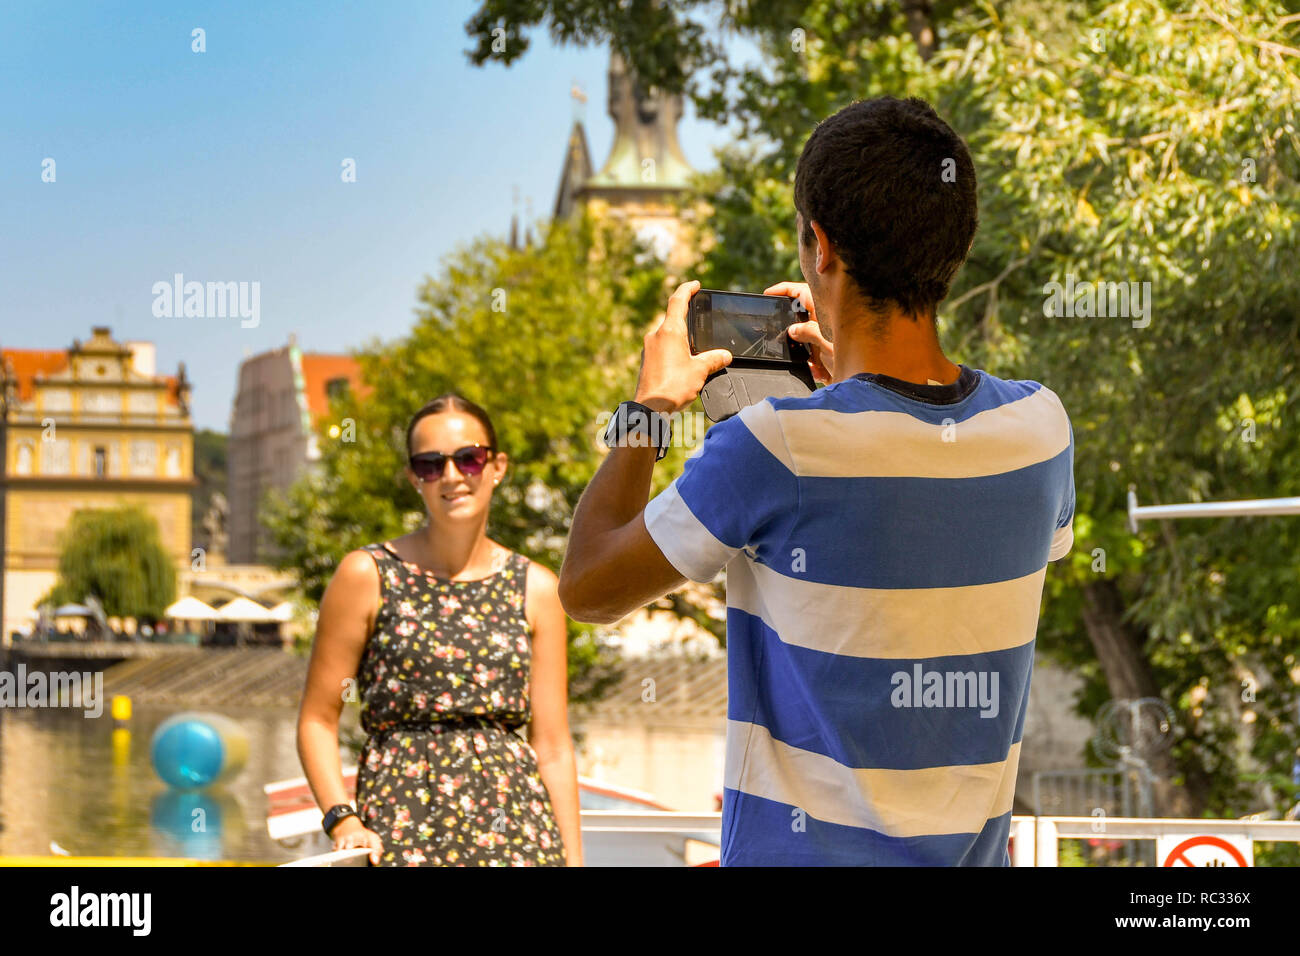 PRAGUE, CZECH REPUBLIC - AUGUST 2018: Person taking a picture on a mobile phone. Stock Photo